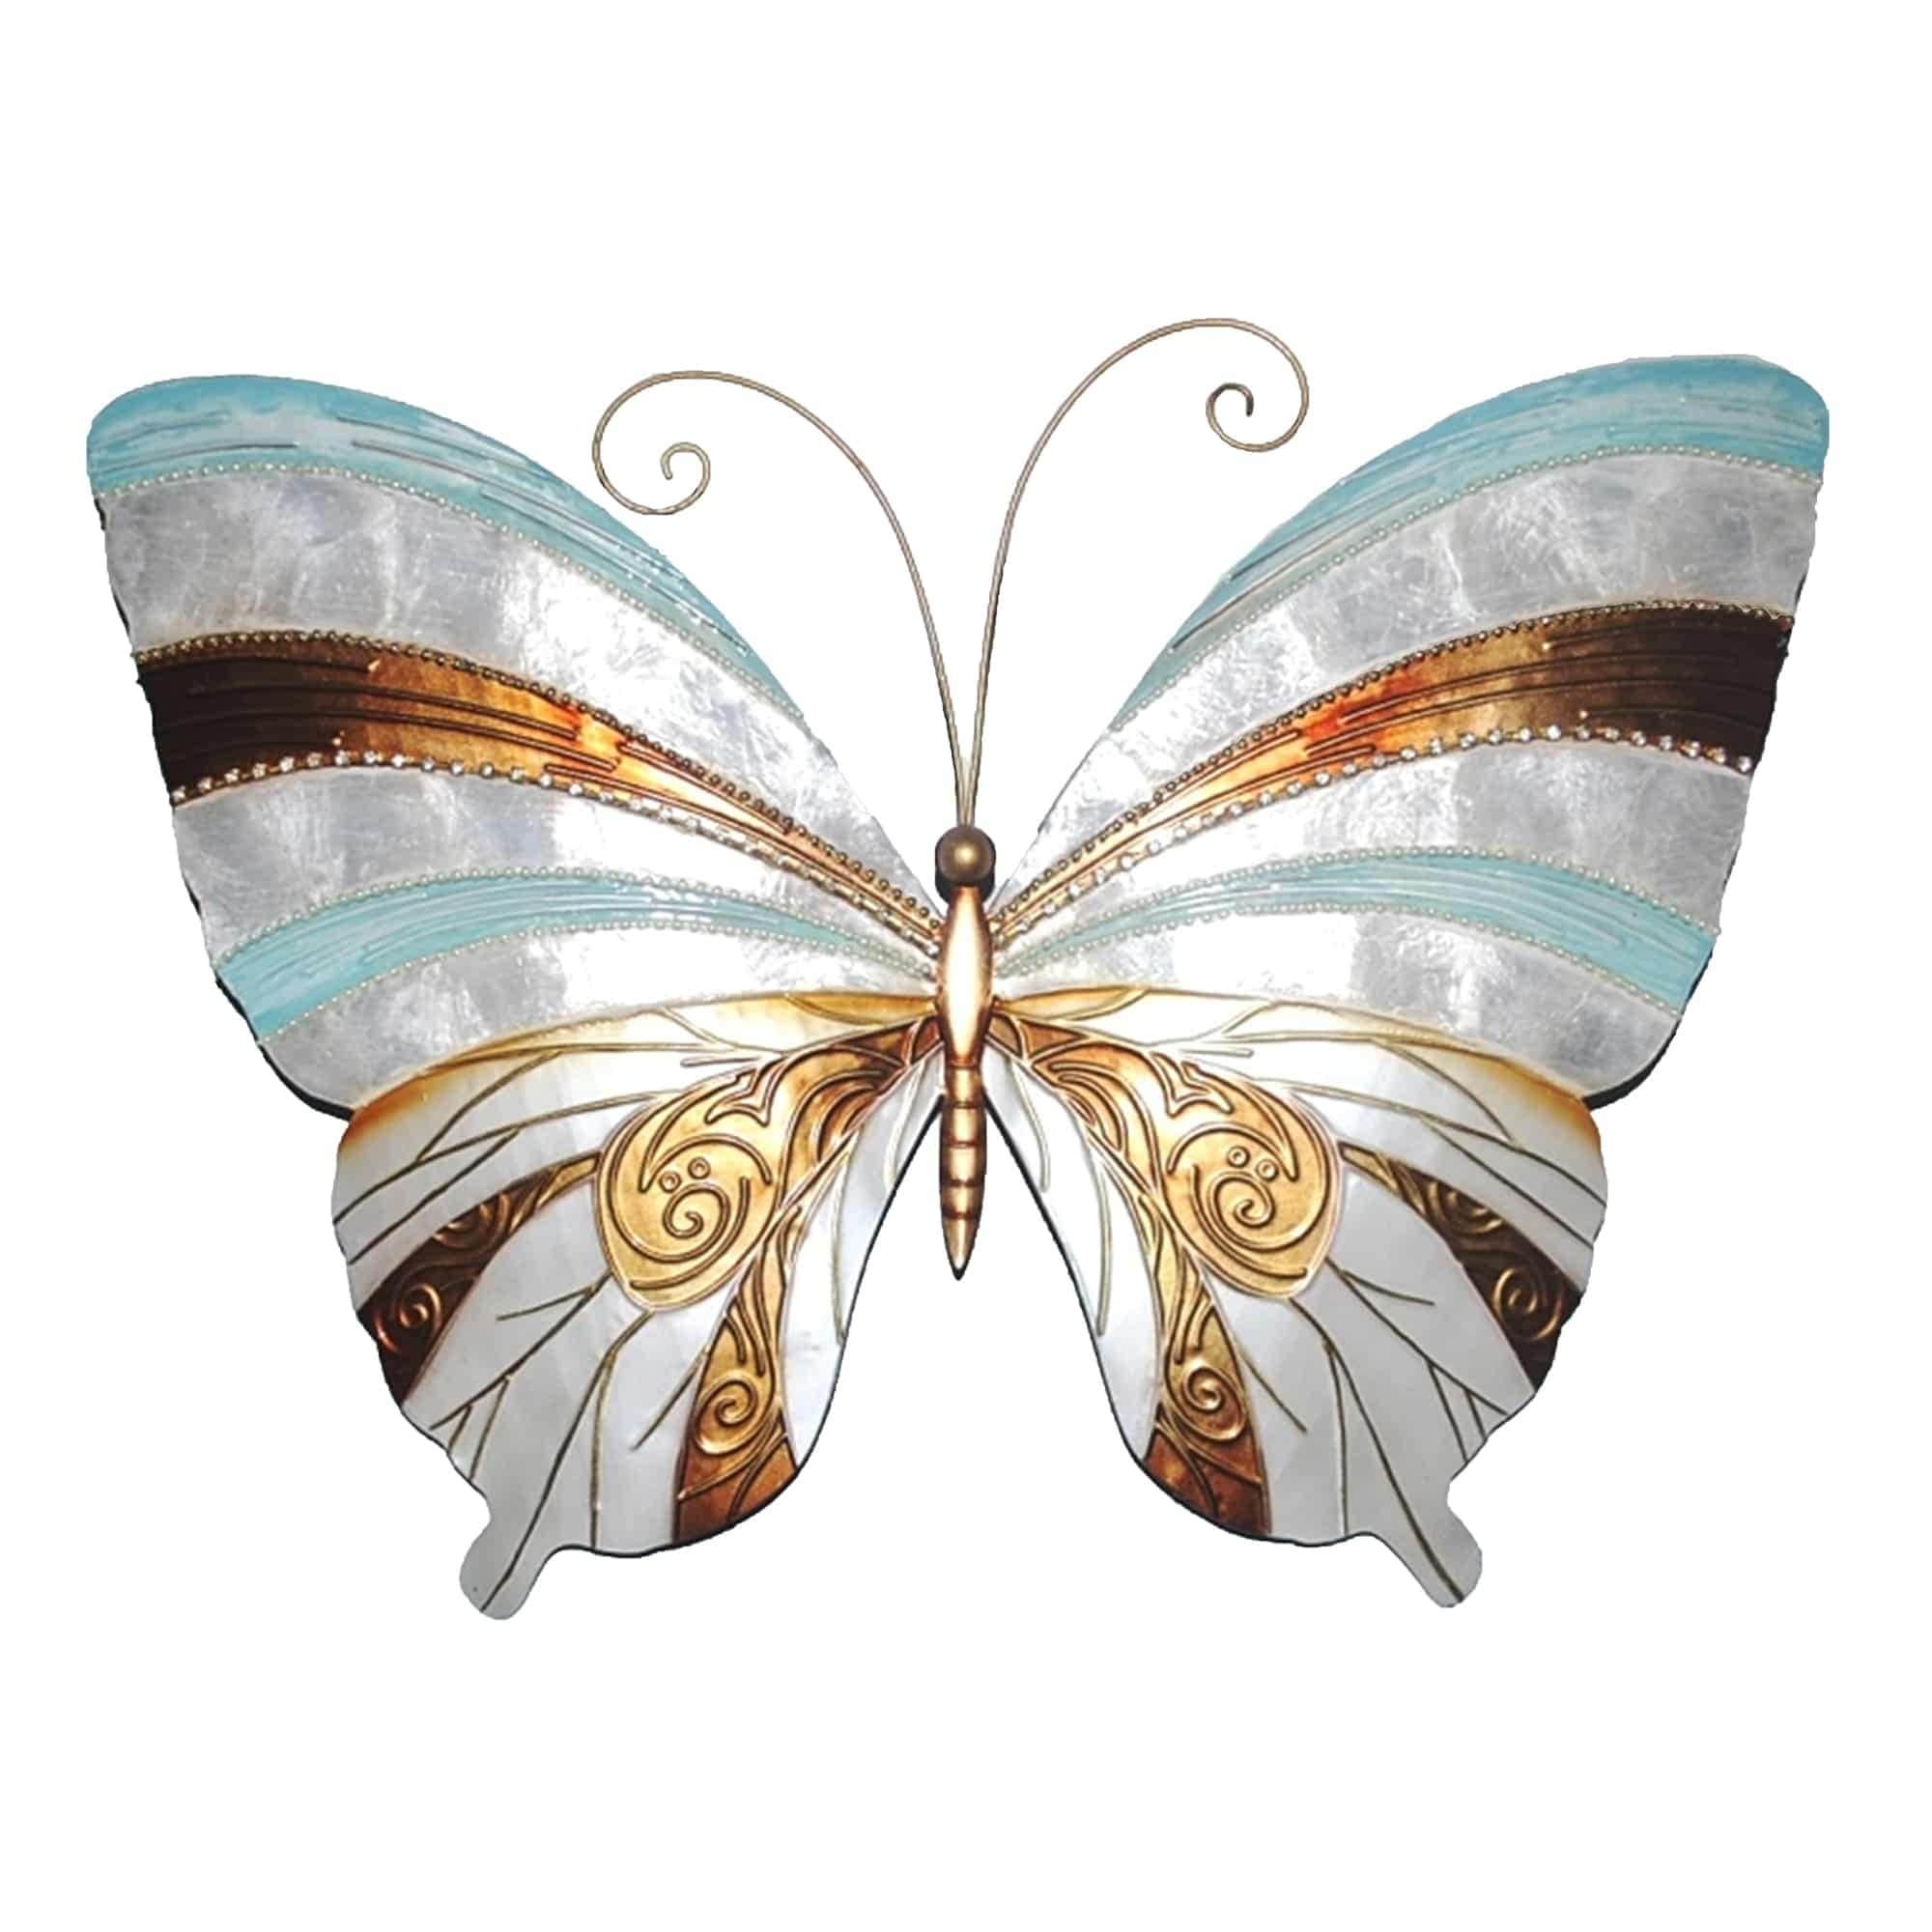 Butterfly Wall Decor Blue Pearl And Copper (m2062) - 1 x 17.5 x 13